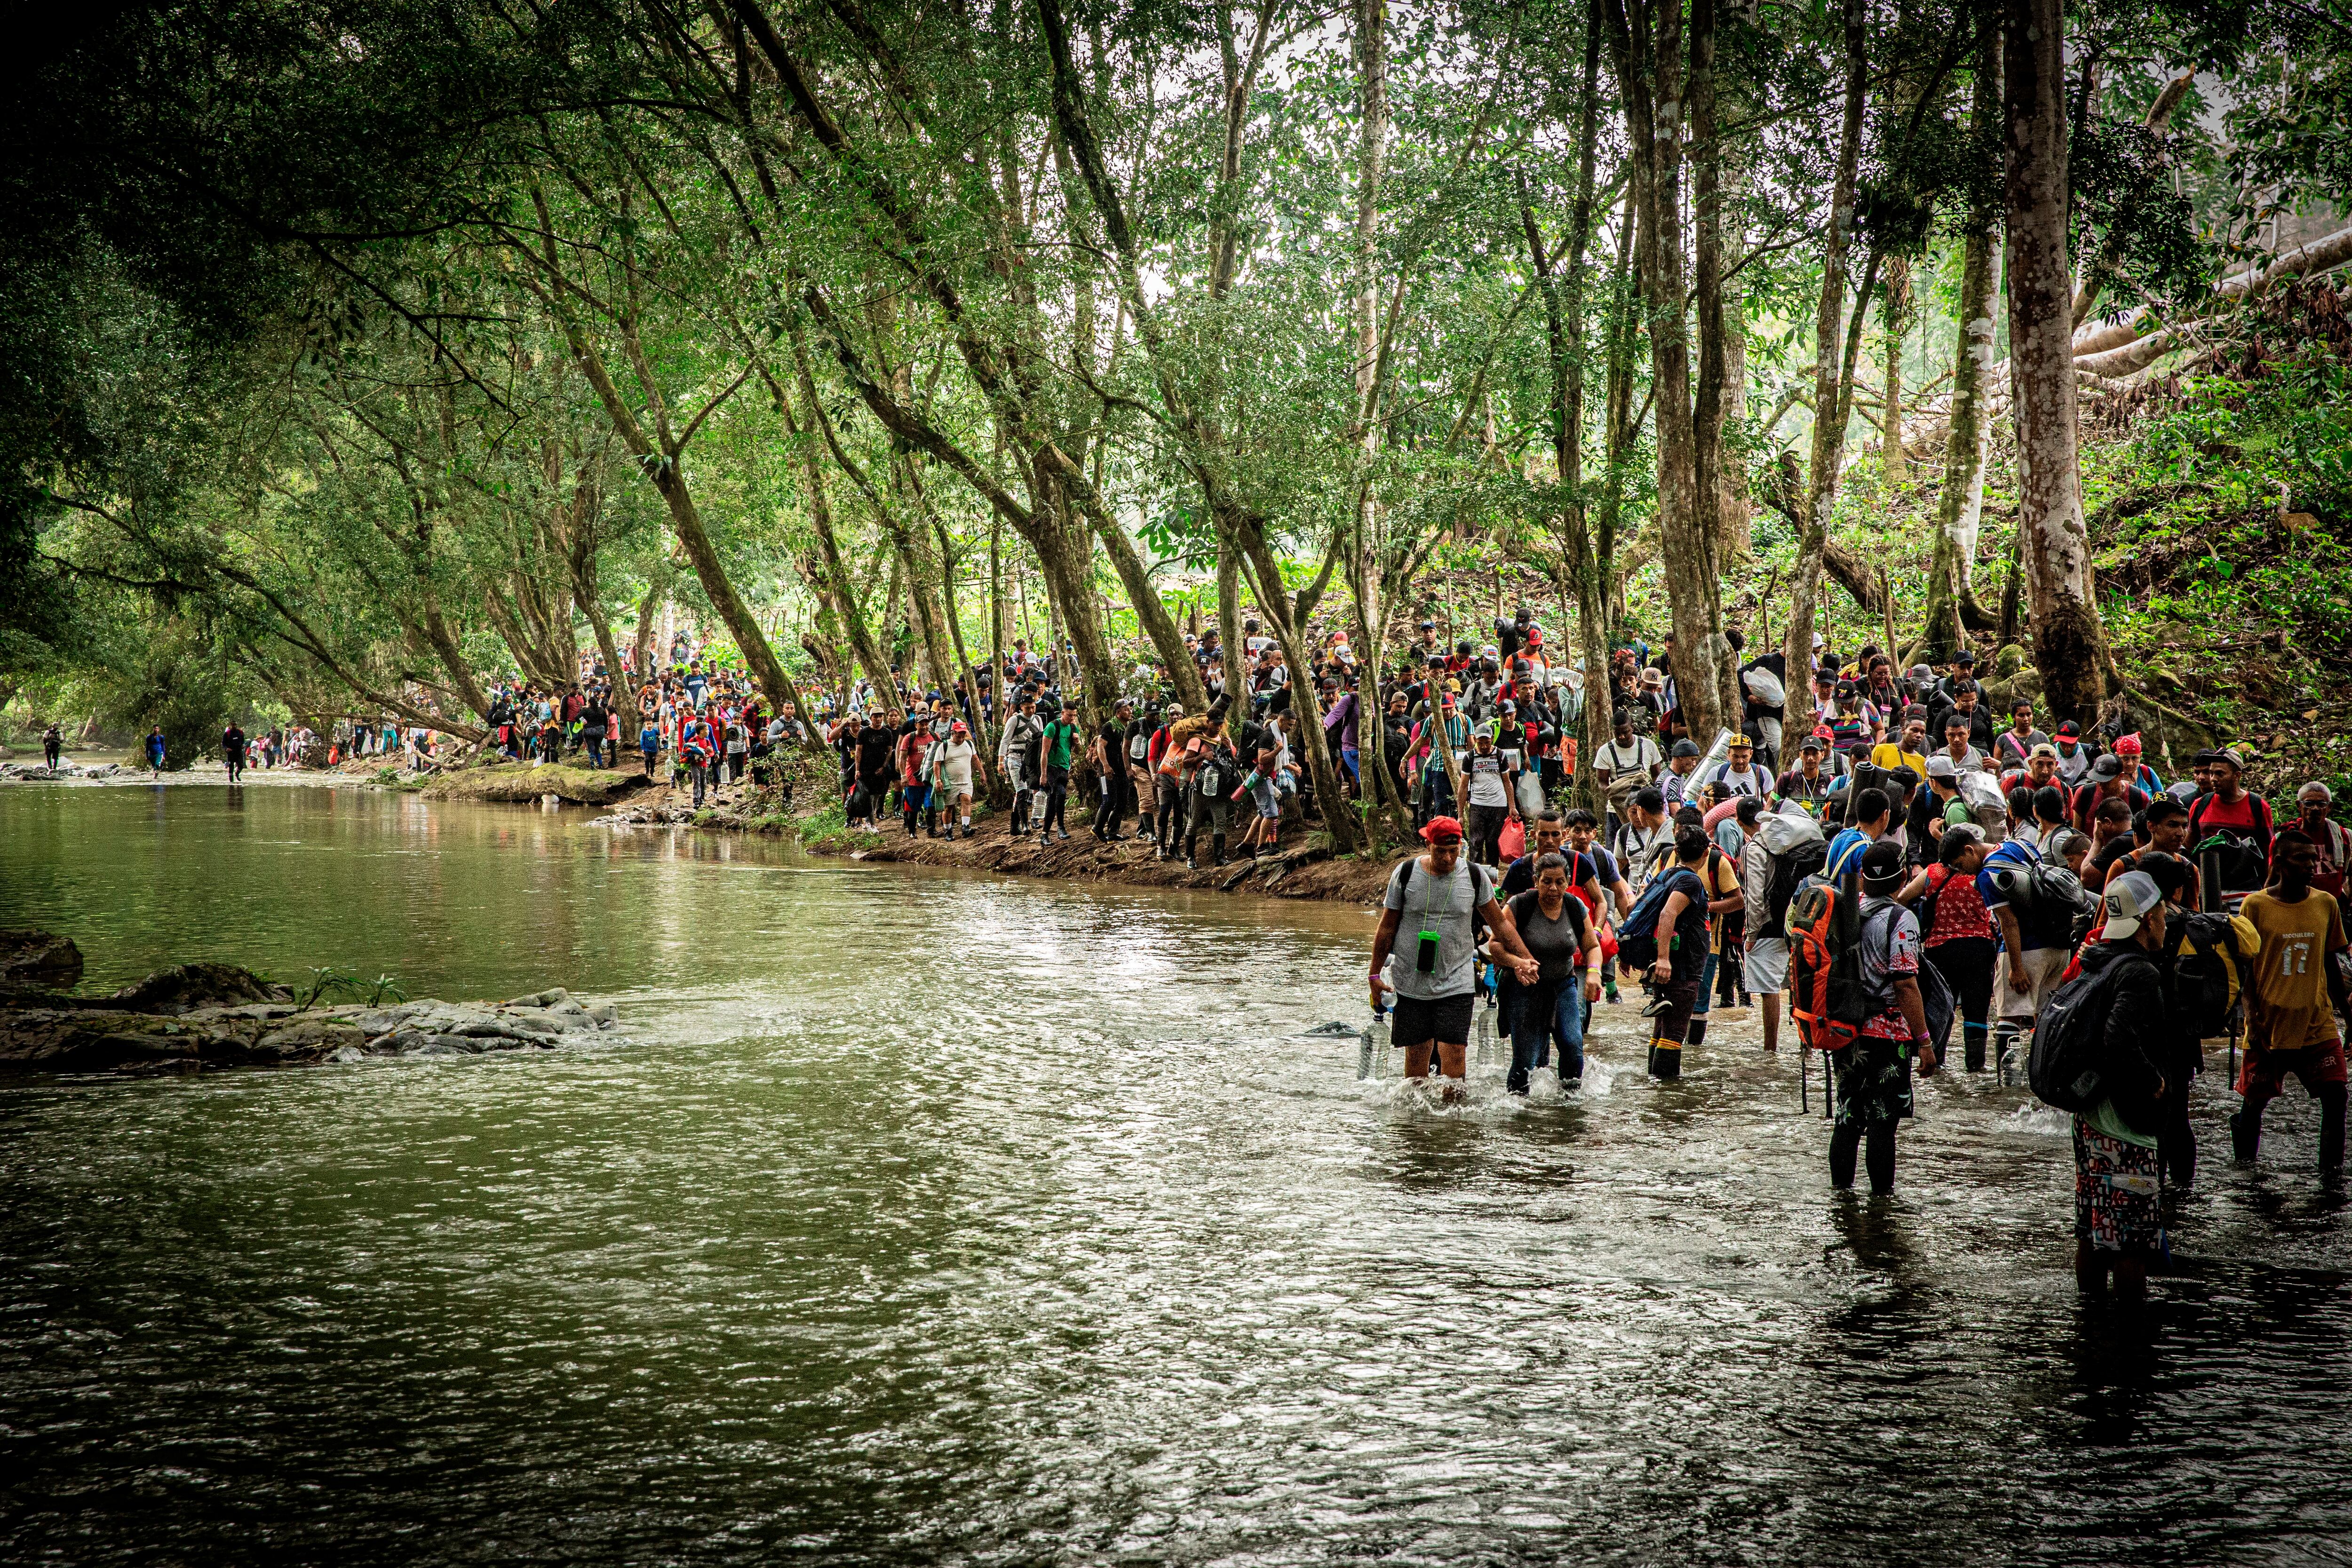 The Darién is a jungle that connects South America to Central America.  It is located between the territories of Colombia and Panama.  (Juan Carlos Tomasi/MSF).